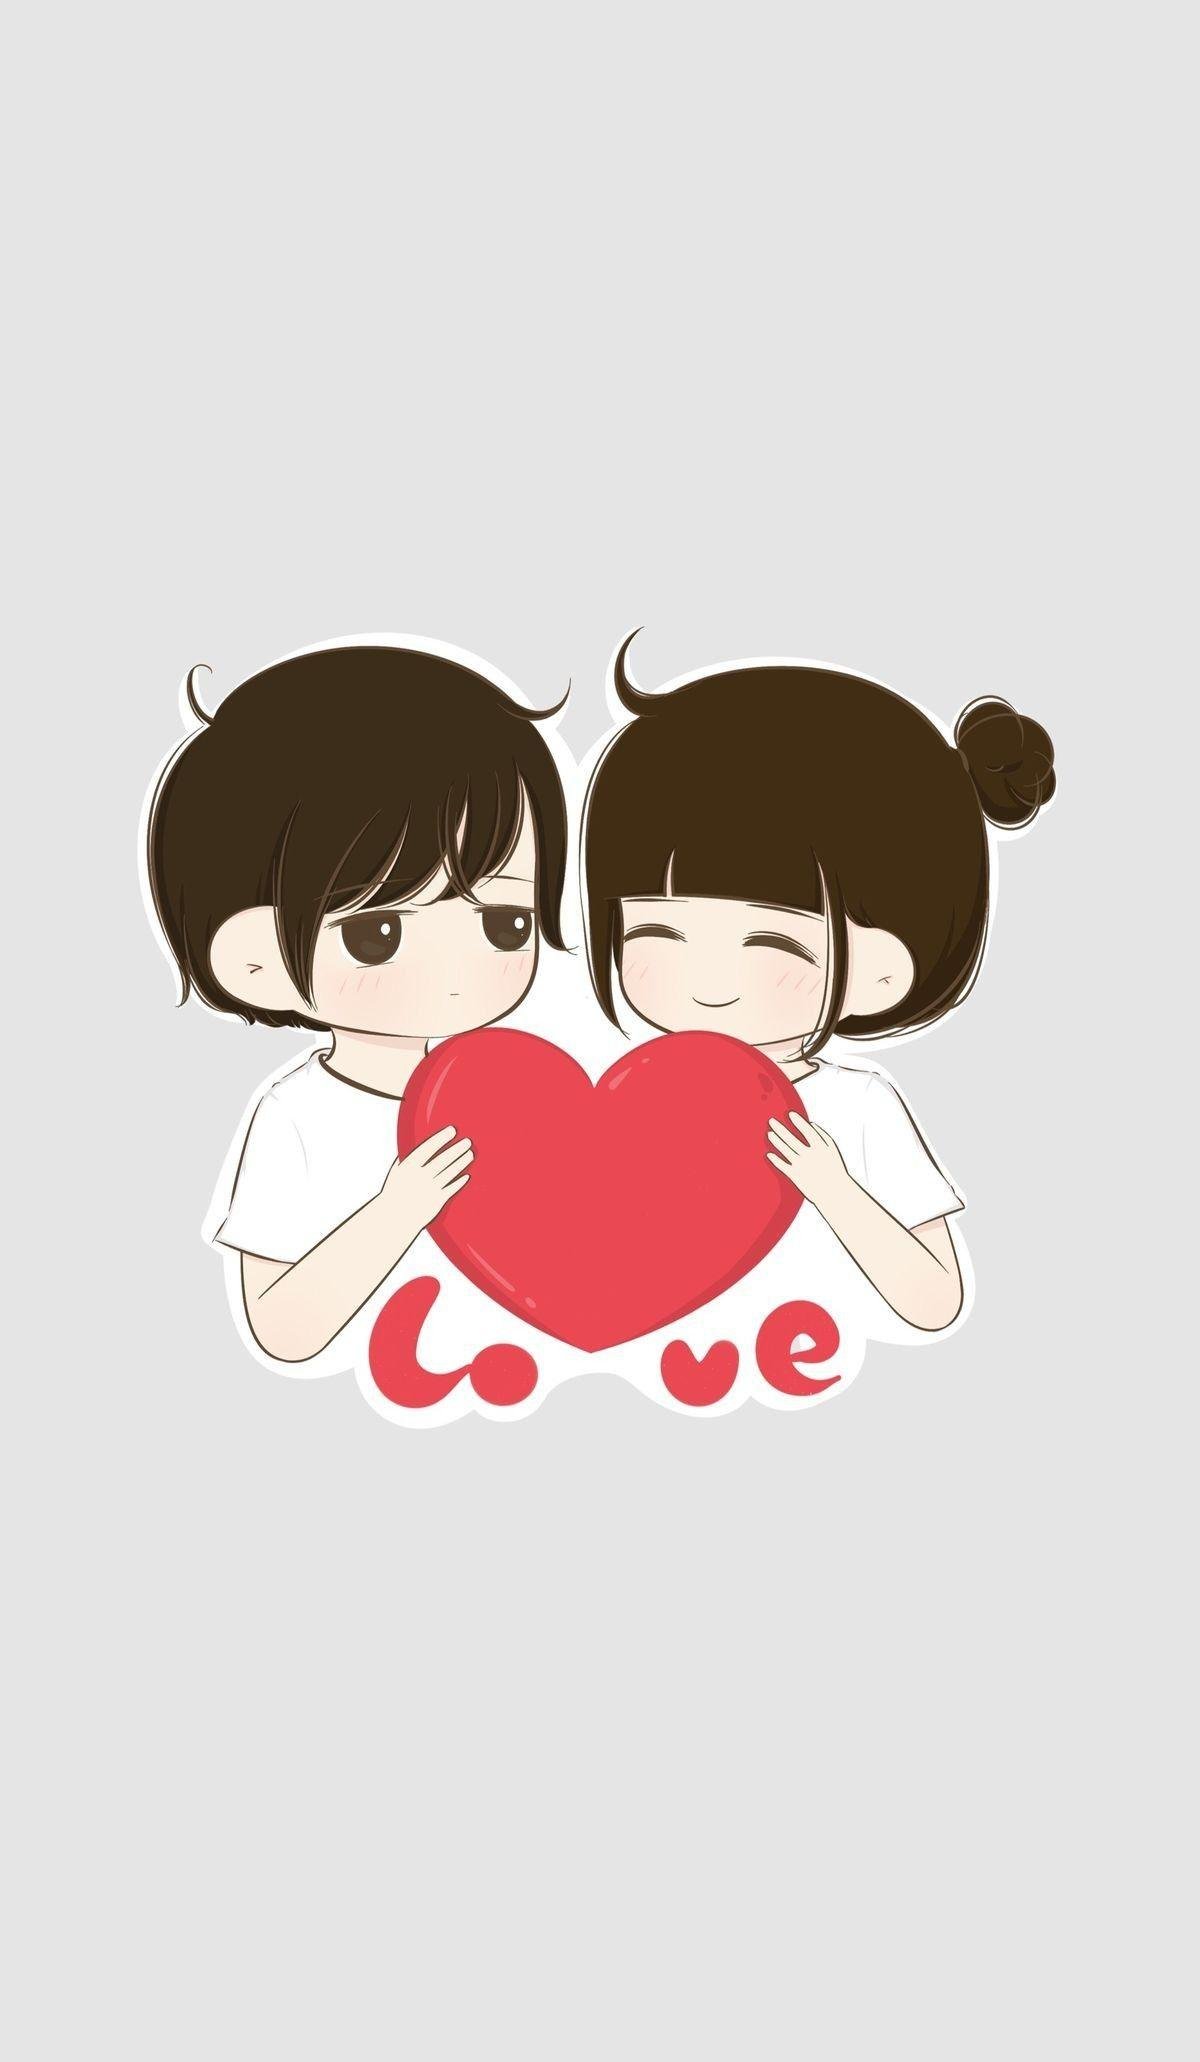 Love Couple With Heart